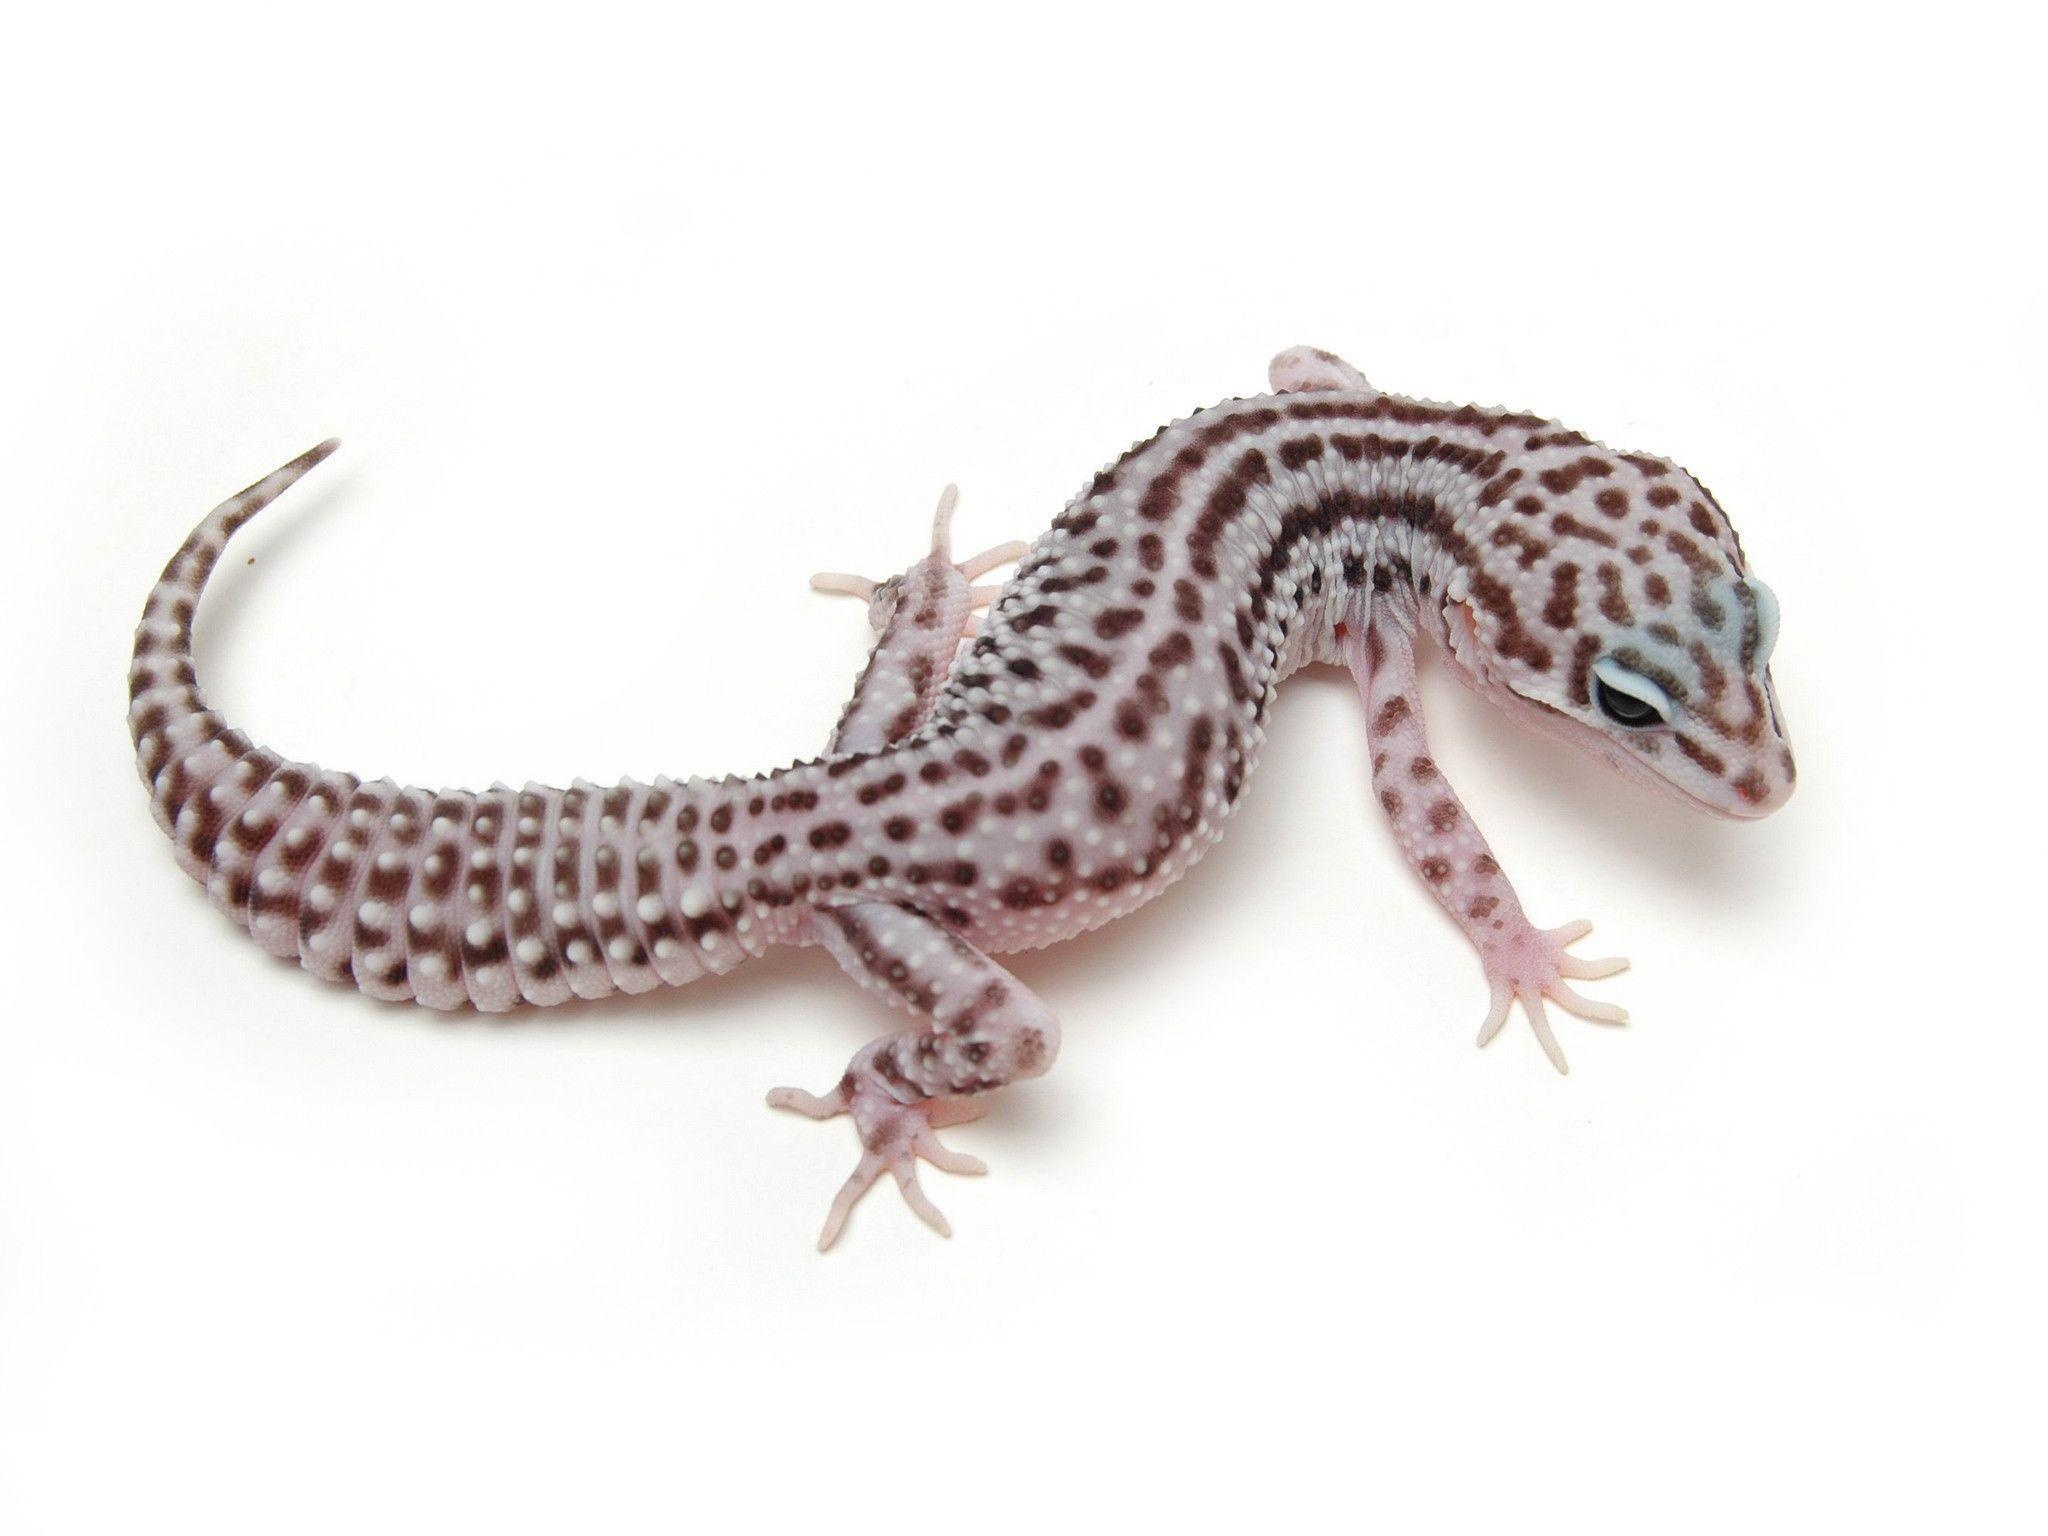 Gecko: Eublepharis macularius, First described as a species by zoologist Edward Blyth in 1854. 2050x1540 HD Background.